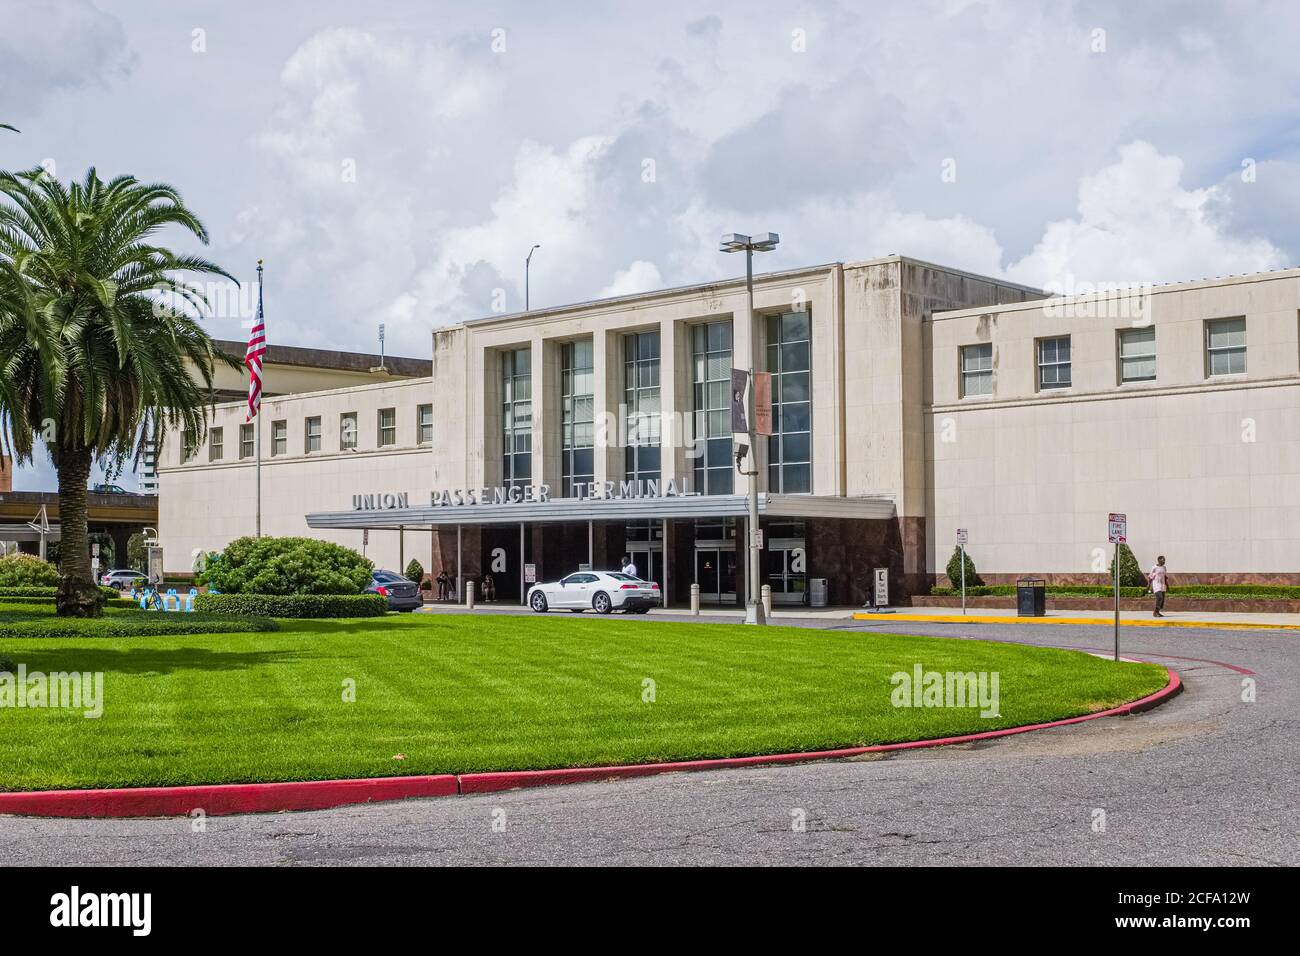 Union Passenger Terminal in Downtown New Orleans Stock Photo